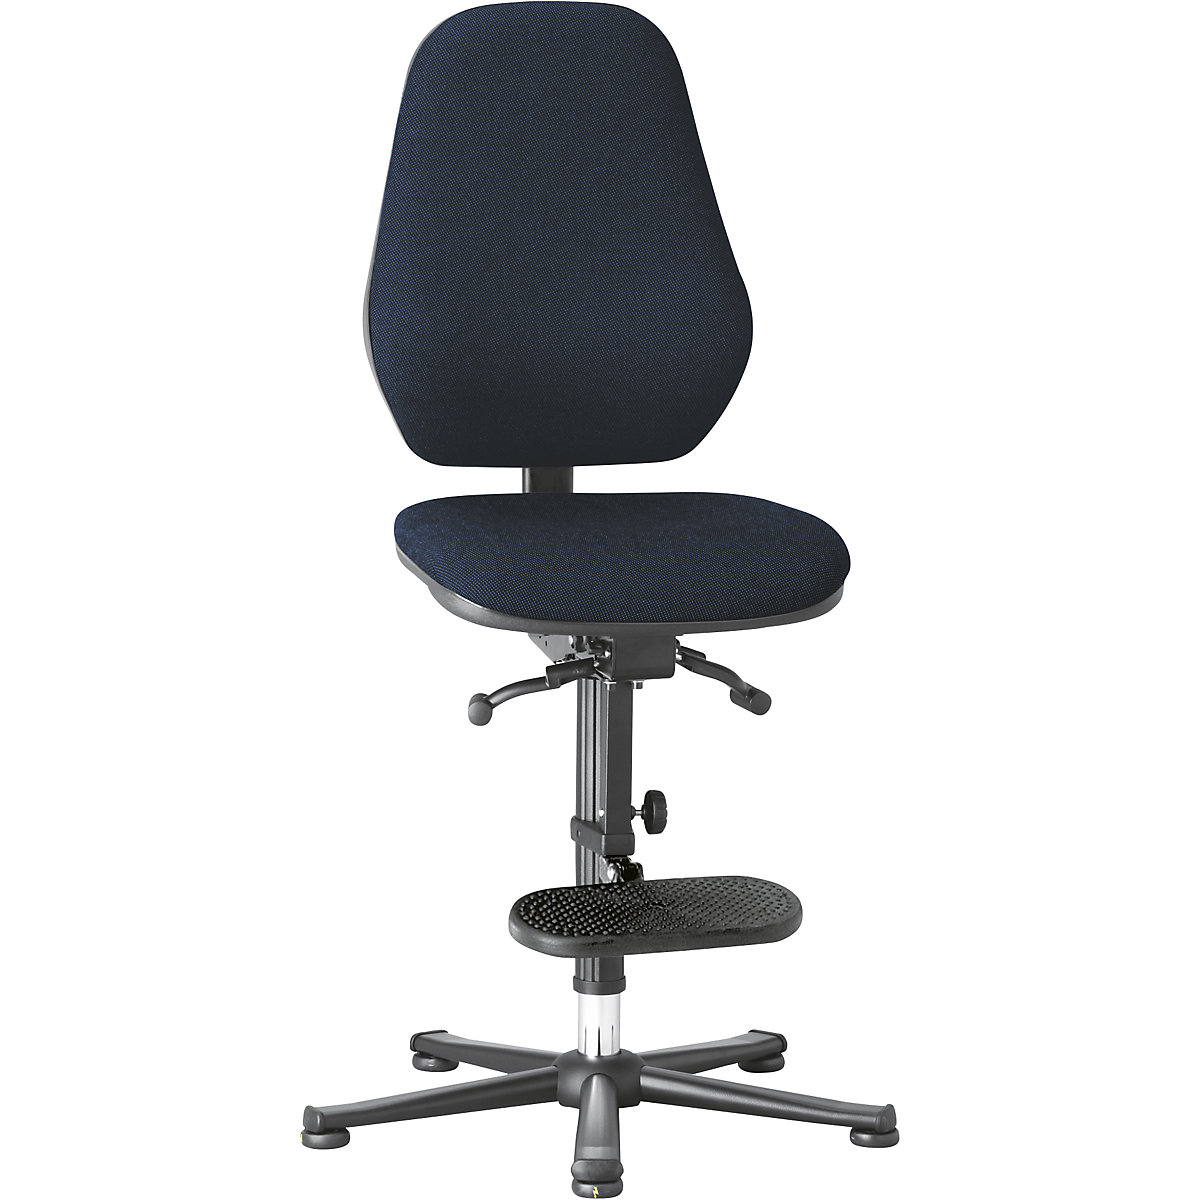 Industrial swivel chair – bimos, with ESD protection, with synchronous mechanism and weight adjustment, floor glides, step-up, blue fabric covering-15